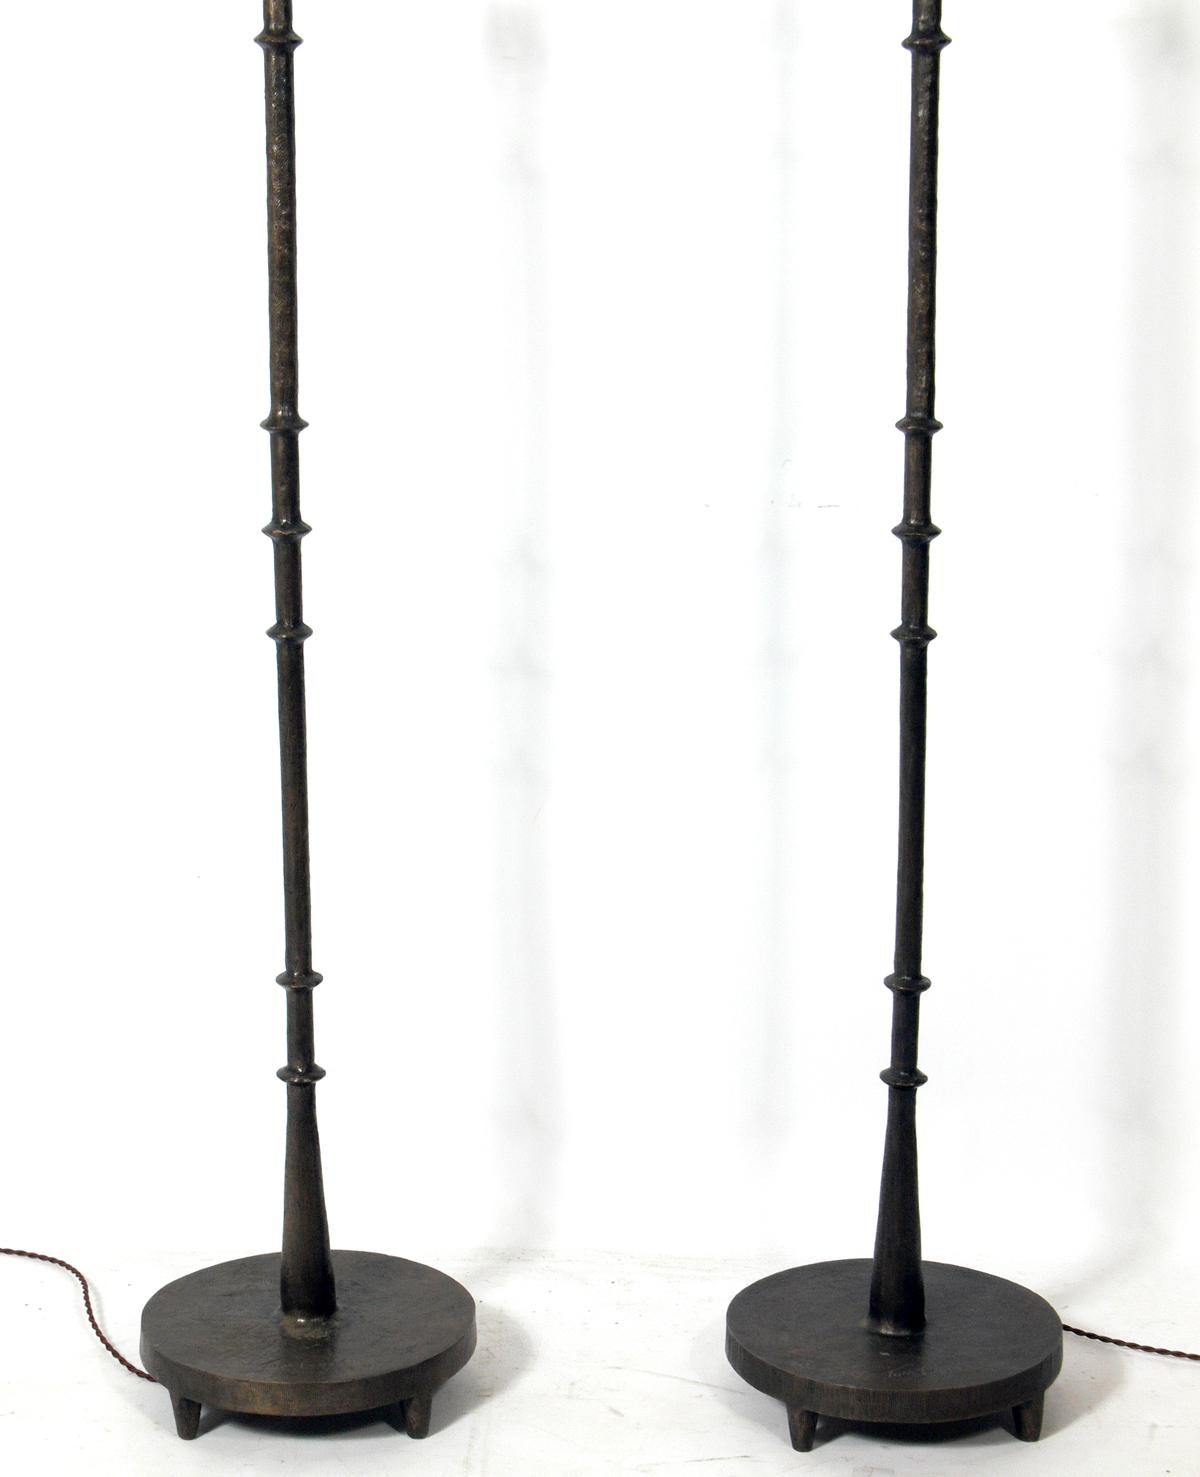 Solid bronze floor lamps by Tom Corbin, American, circa 2000s. They retain their warm original patina. Signed and dated at the bases. Corbin's work was clearly influenced by Diego Giacometti. The lamps have been rewired with cloth cords and the